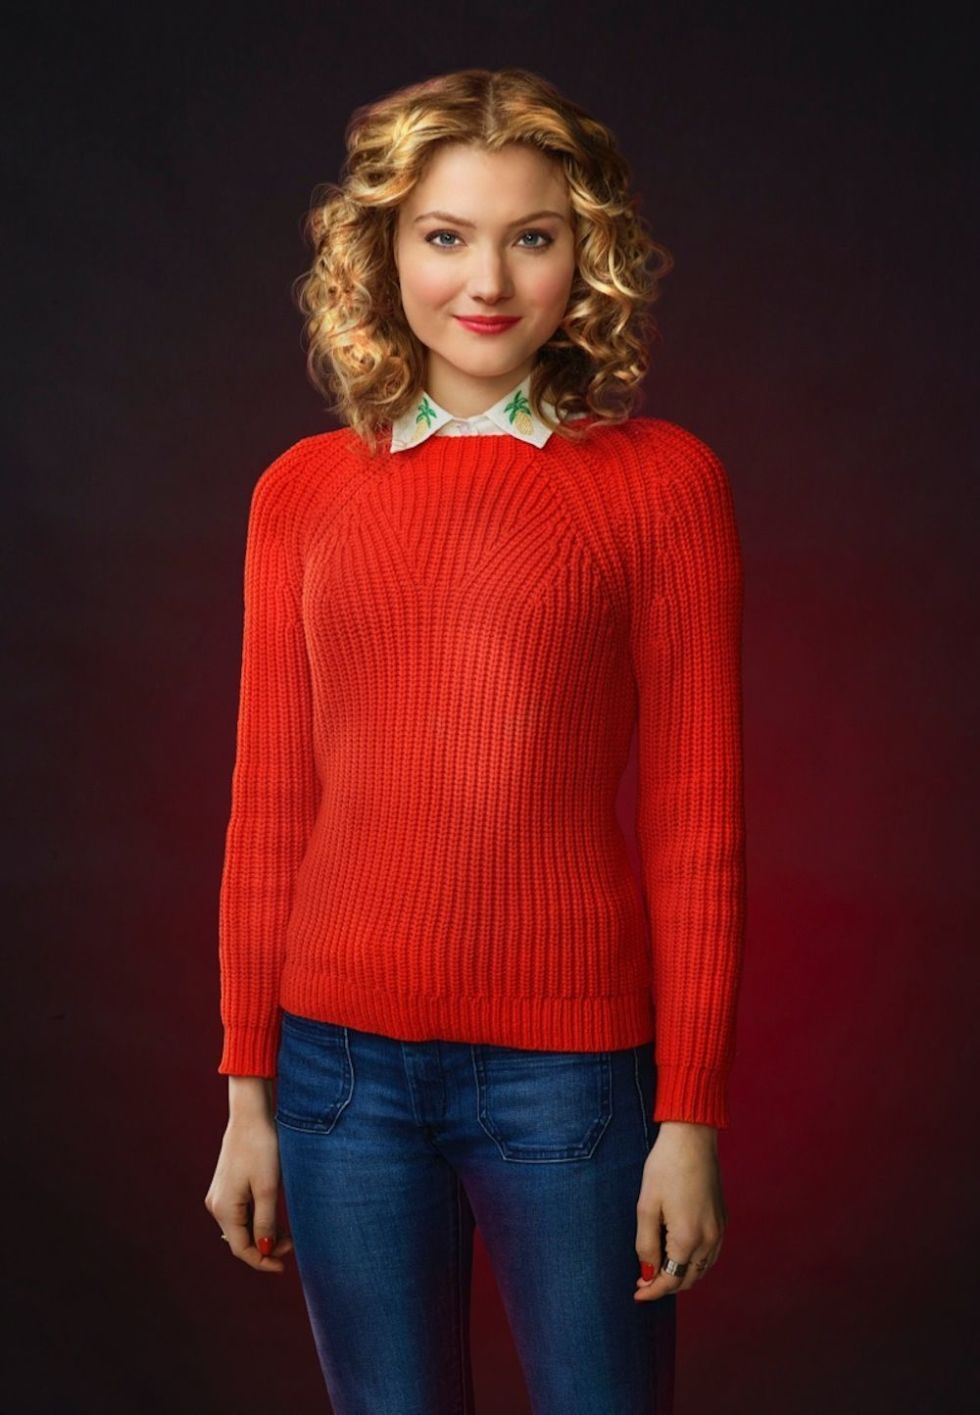 Skyler Samuels Reveals the "Scream Queens" Killer Theory That's Almost